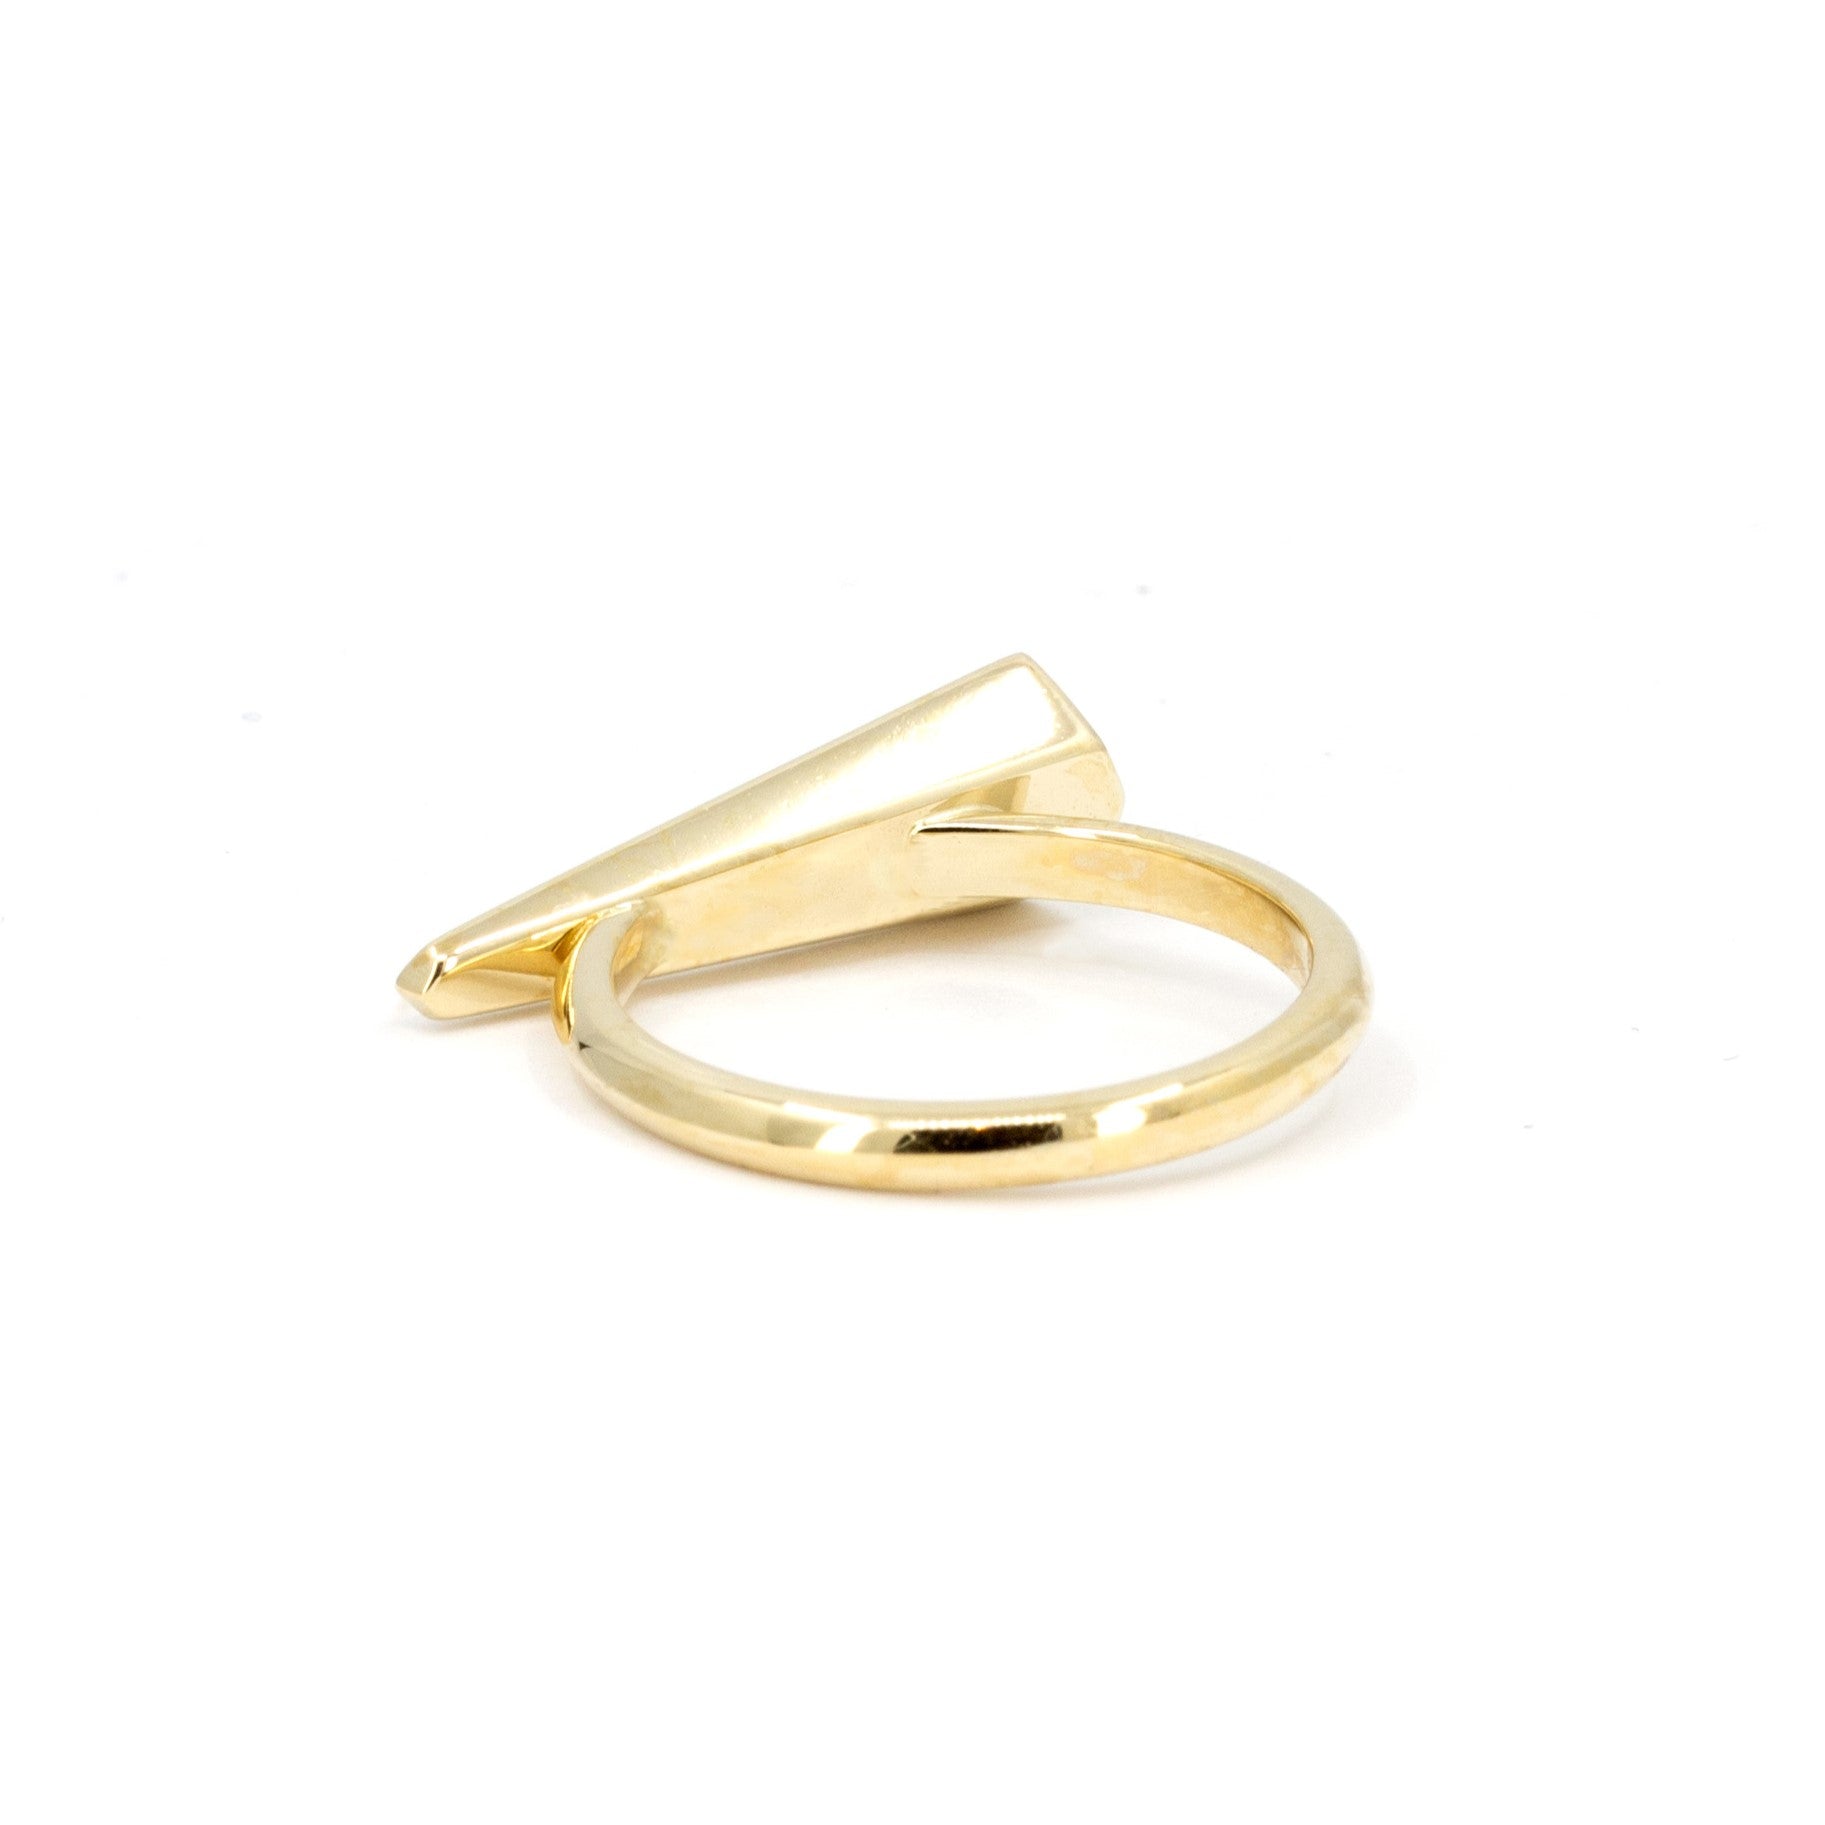 SPINE | Edgy Yellow Gold Diamond Ring